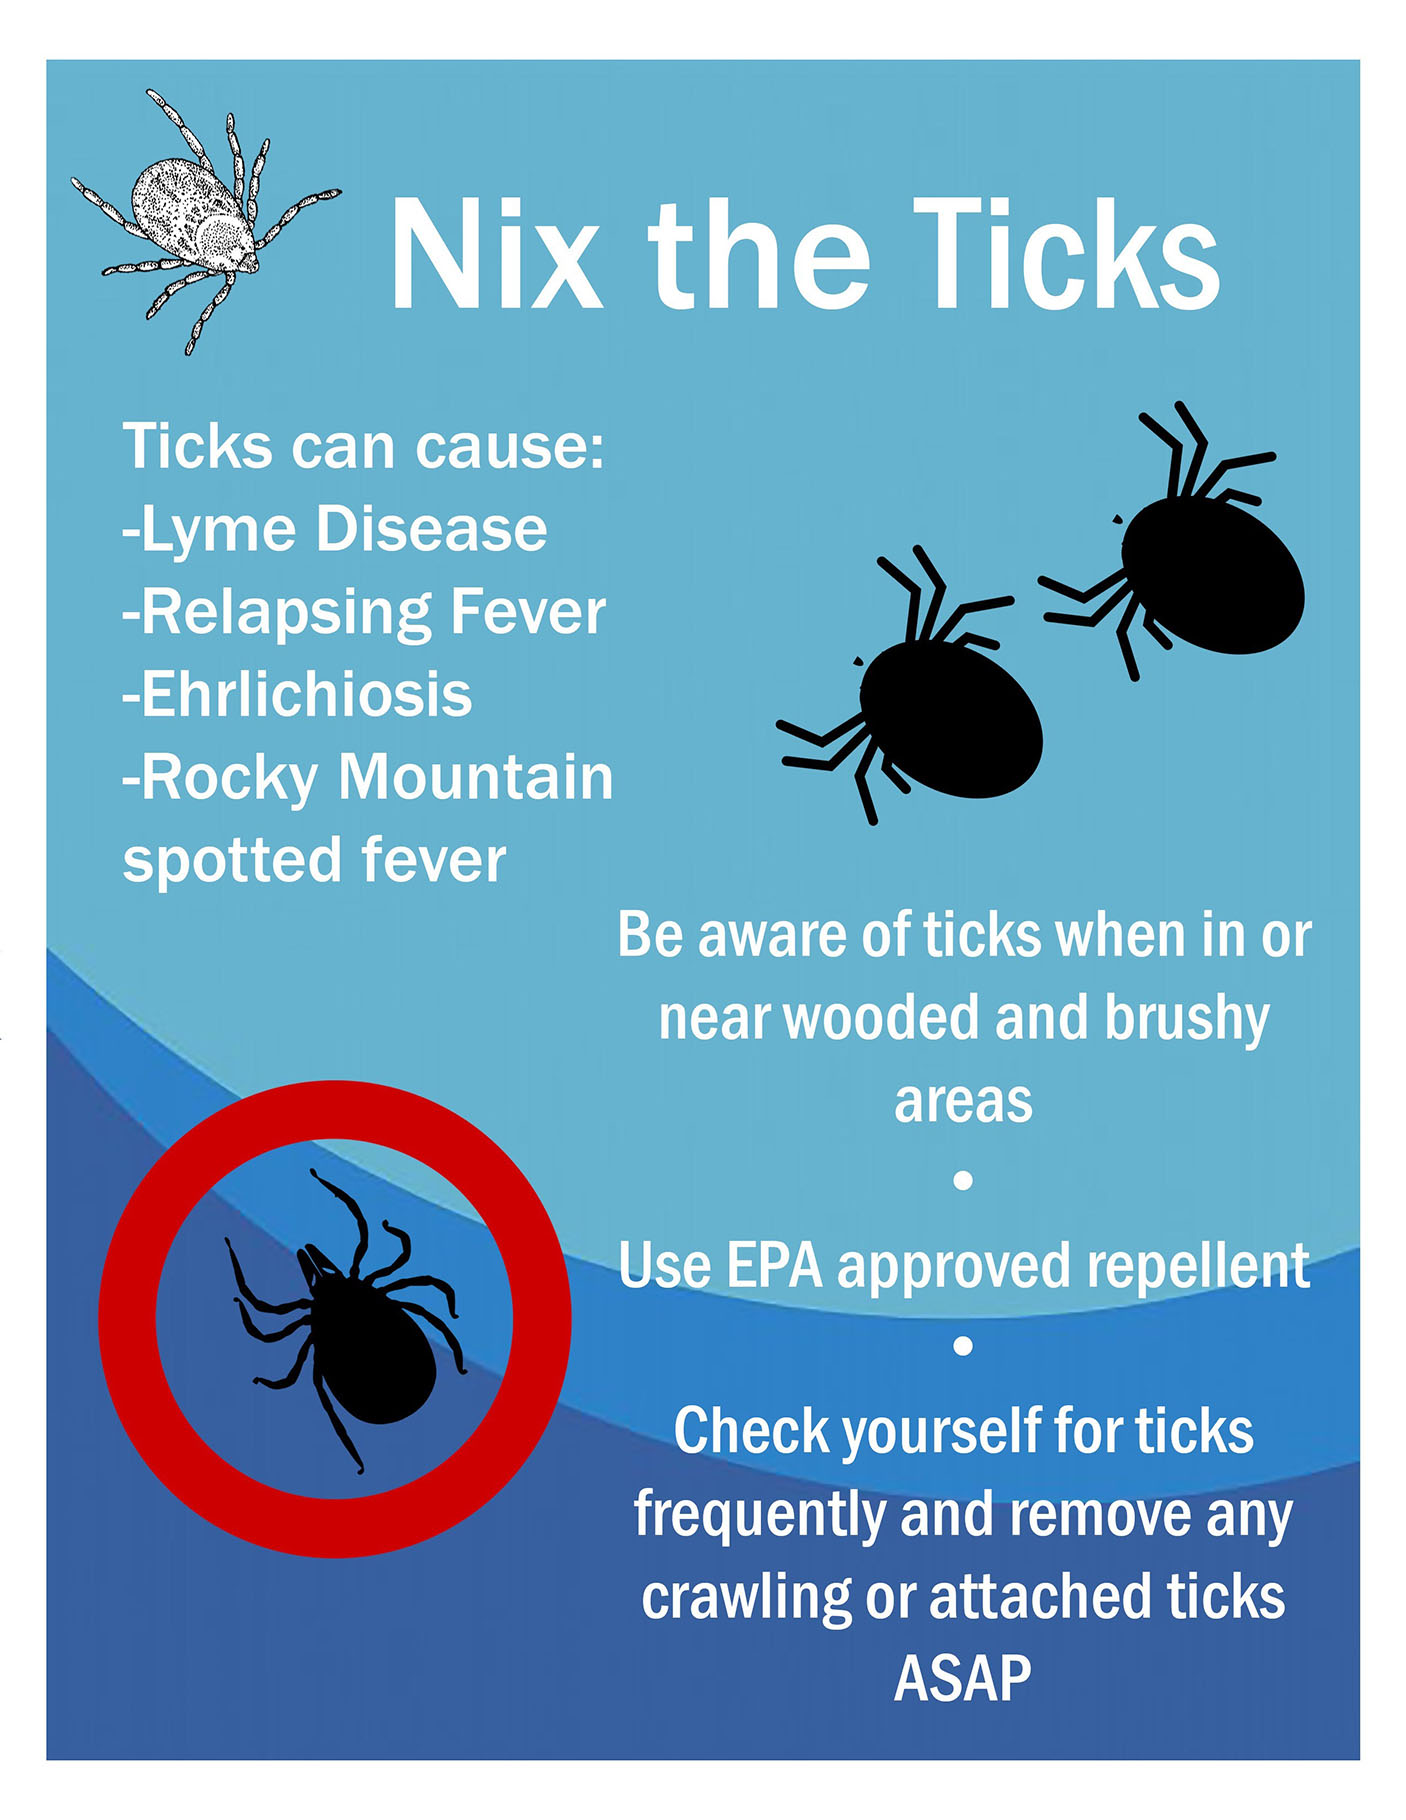 Nix the ticks
      Ticks can cause
      -Lyme Disease -Relapsing Fever -Ehrlichiosis -Rocky Mountain Spotted Fever
      Be aware of ticks when in or near wooded and brushy areas
      Use EPA approved repellent
      Check yourself for ticks frequently and remove any crawling or attached ticks ASAP